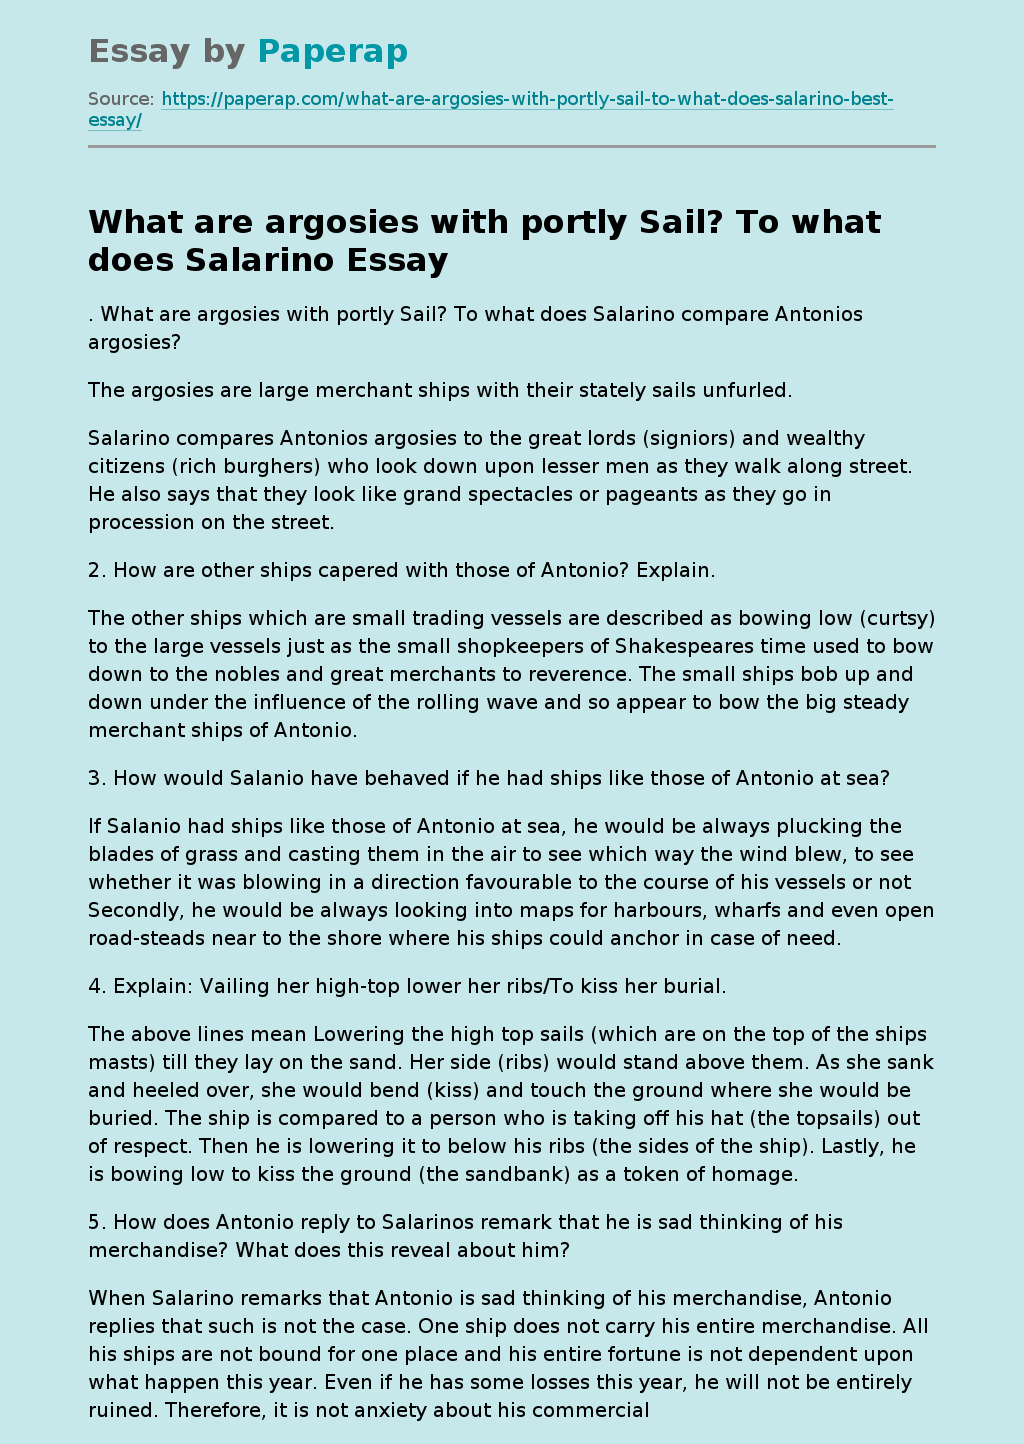 What are argosies with portly Sail? To what does Salarino